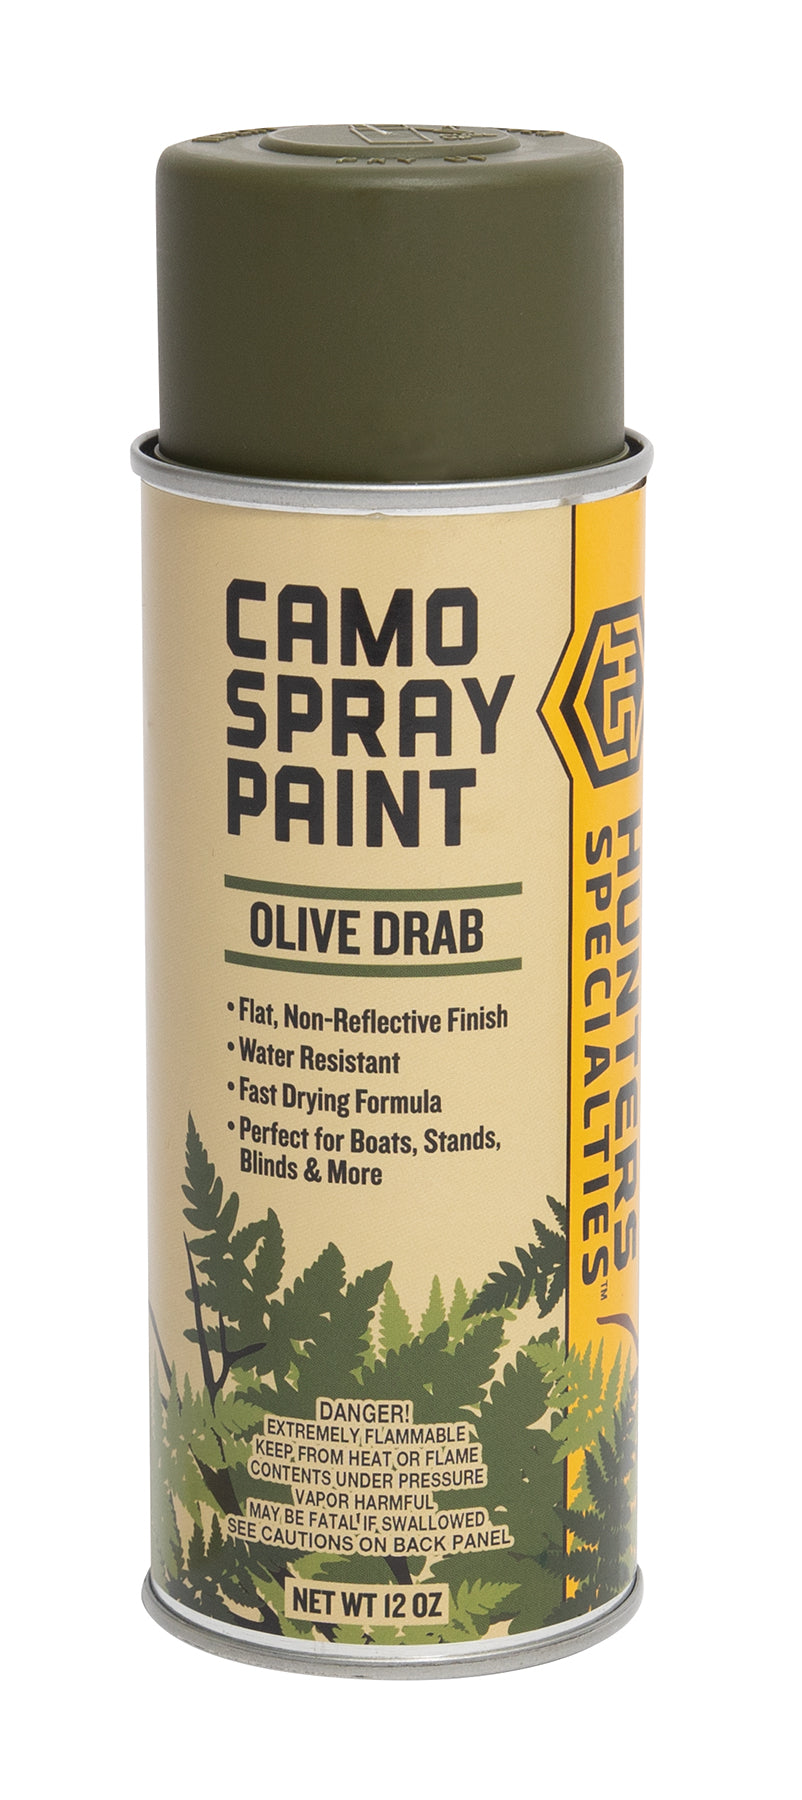 Hunters Specialties Permanent Camo Spray Paint, Olive Drab - 12 oz can